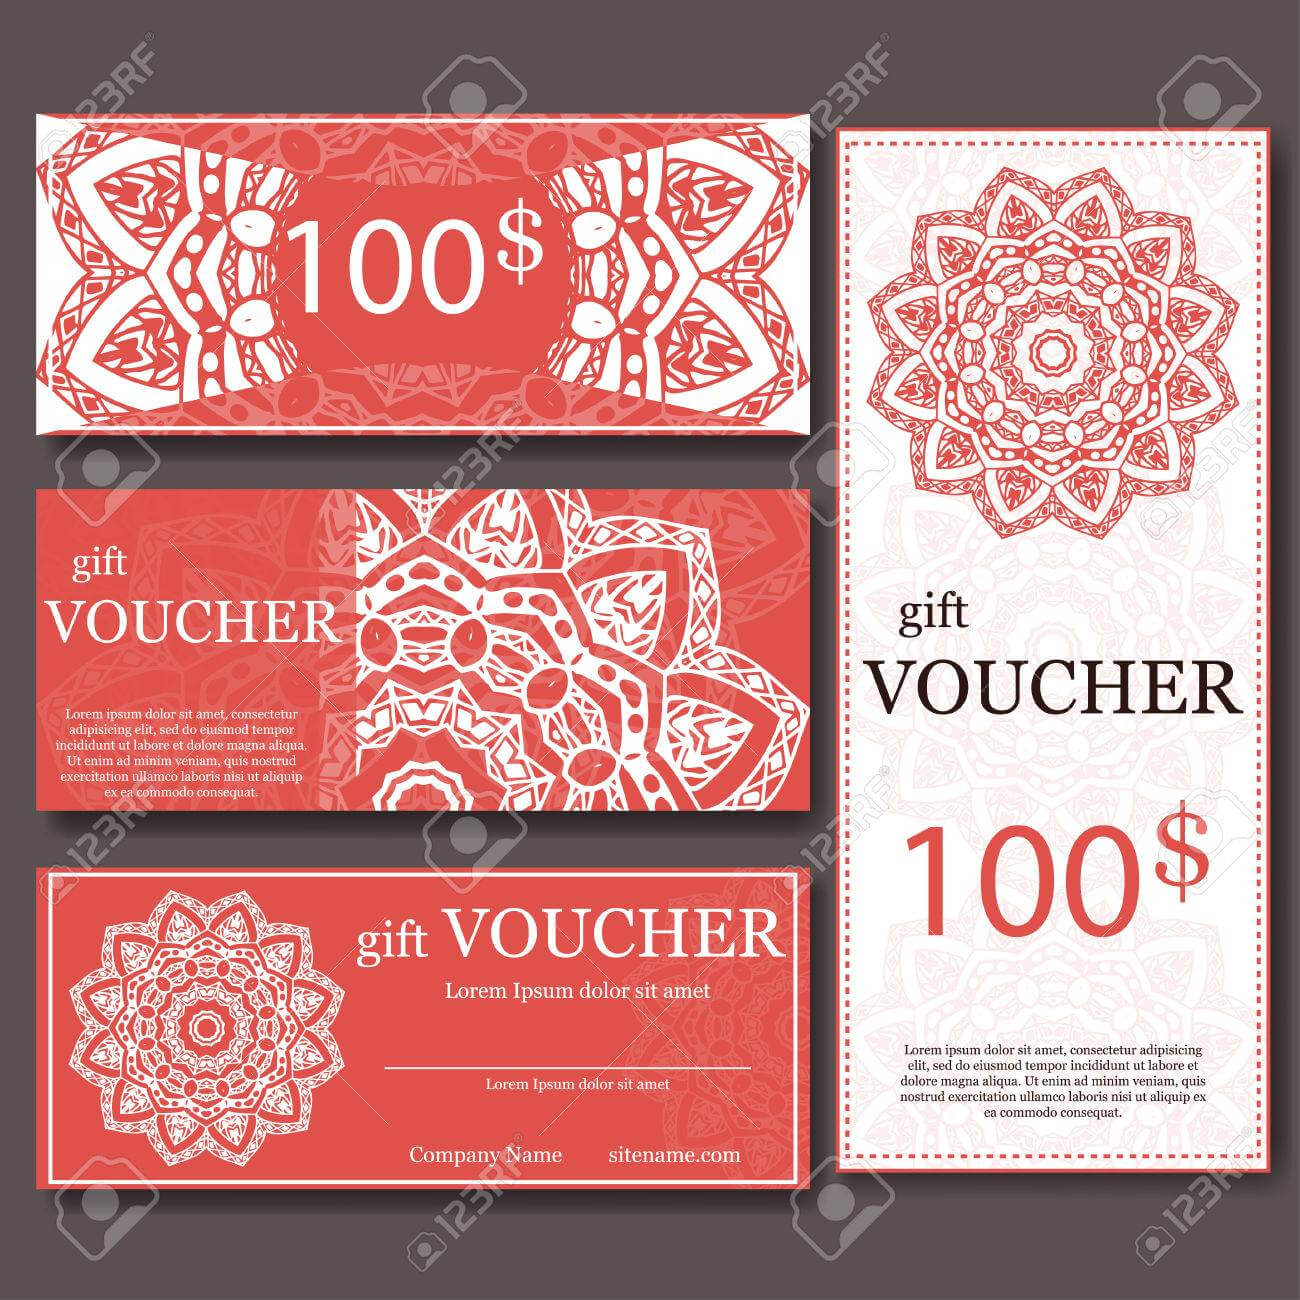 Gift Voucher Template With Mandala. Design Certificate For Sport.. Throughout Yoga Gift Certificate Template Free